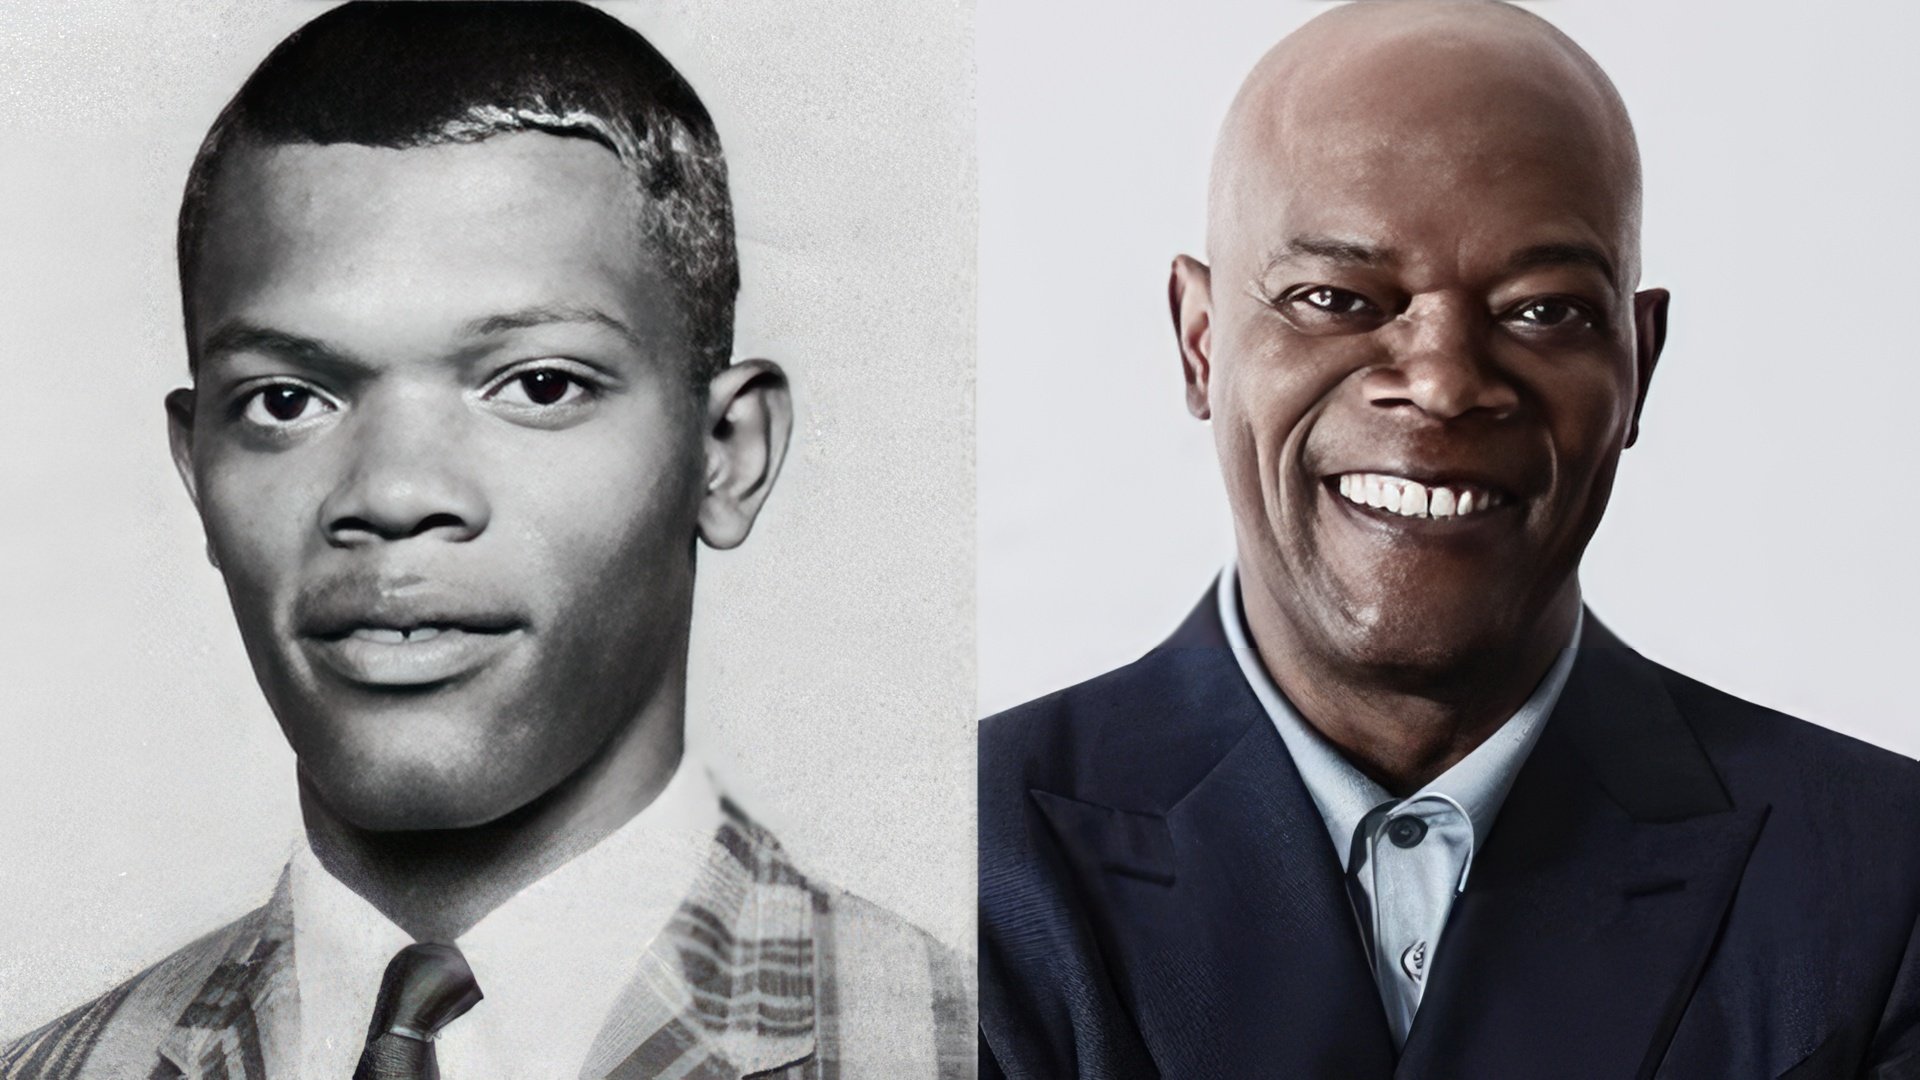  Samuel L. Jackson in his early life and nowadays